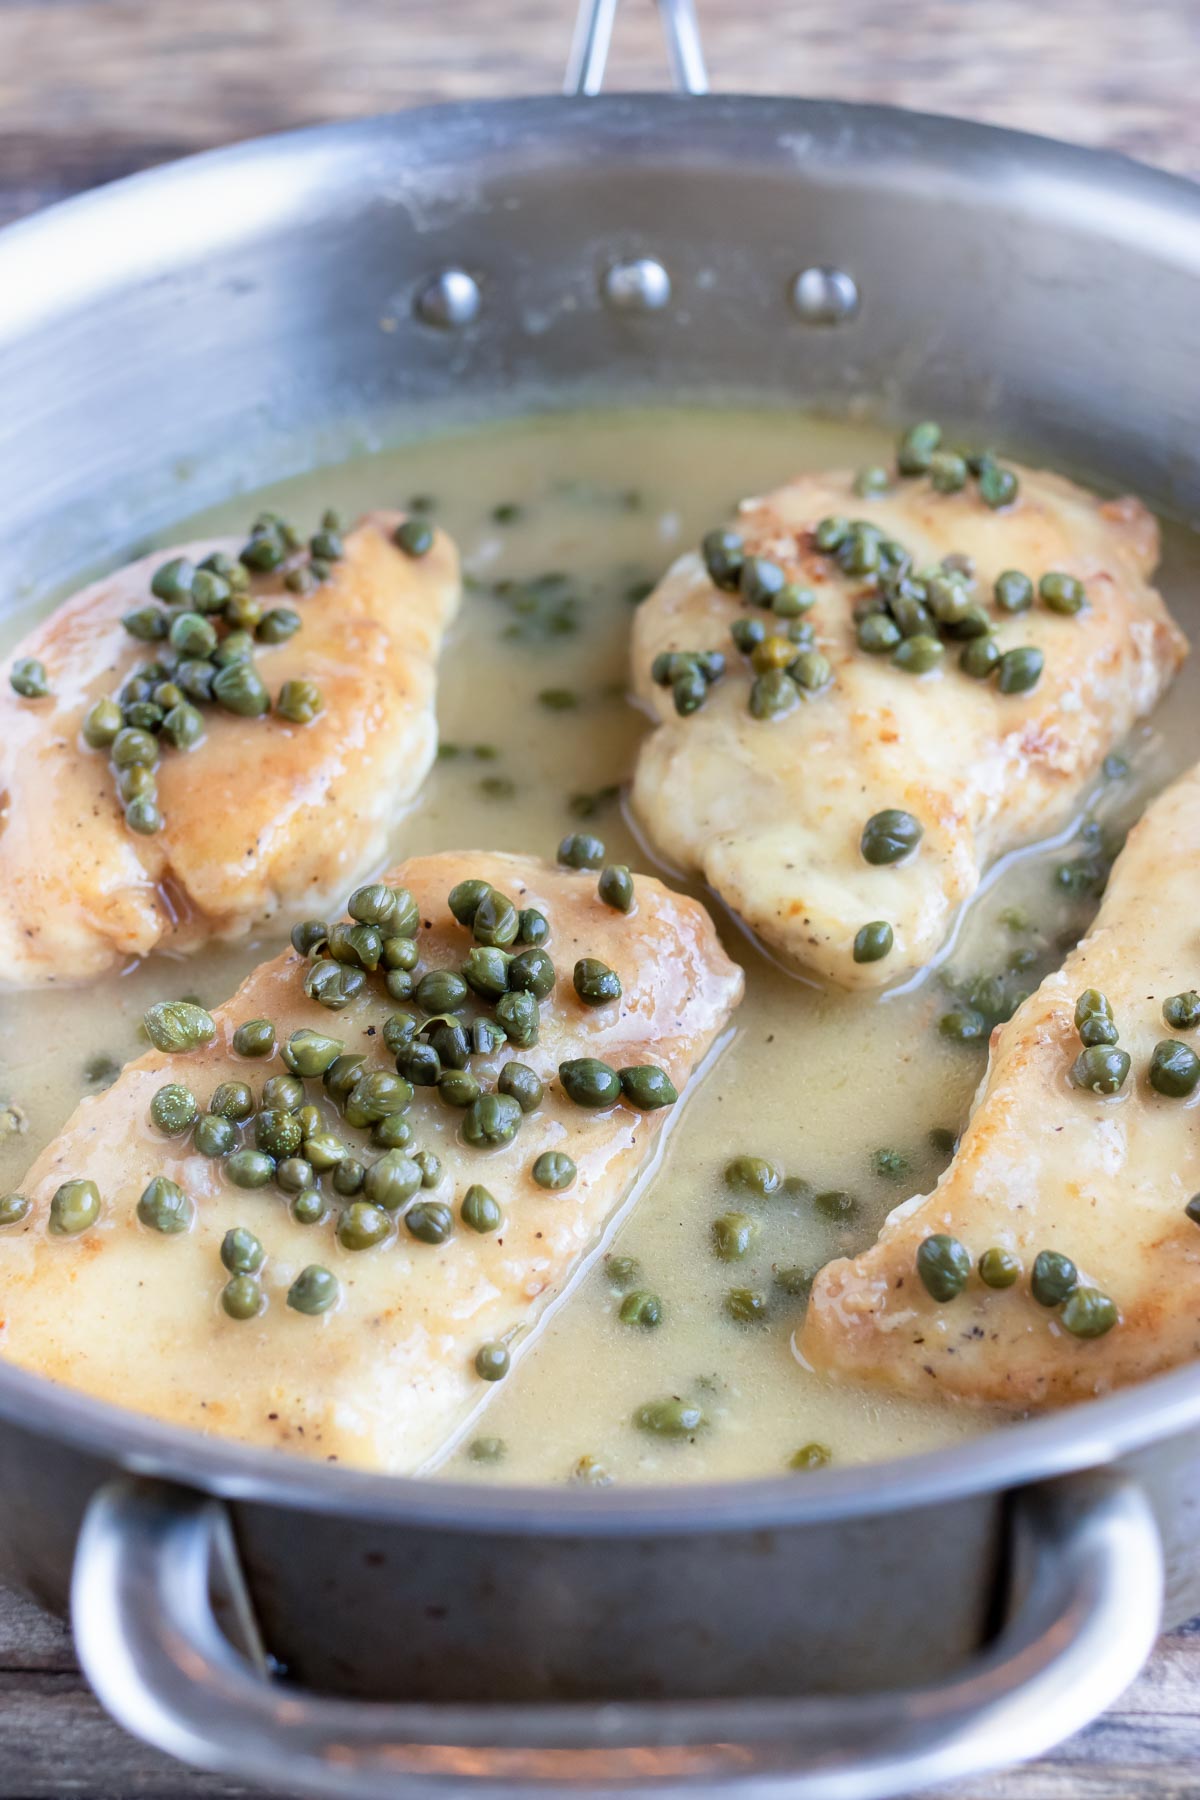 Lemon Chicken Piccata with Capers - Evolving Table